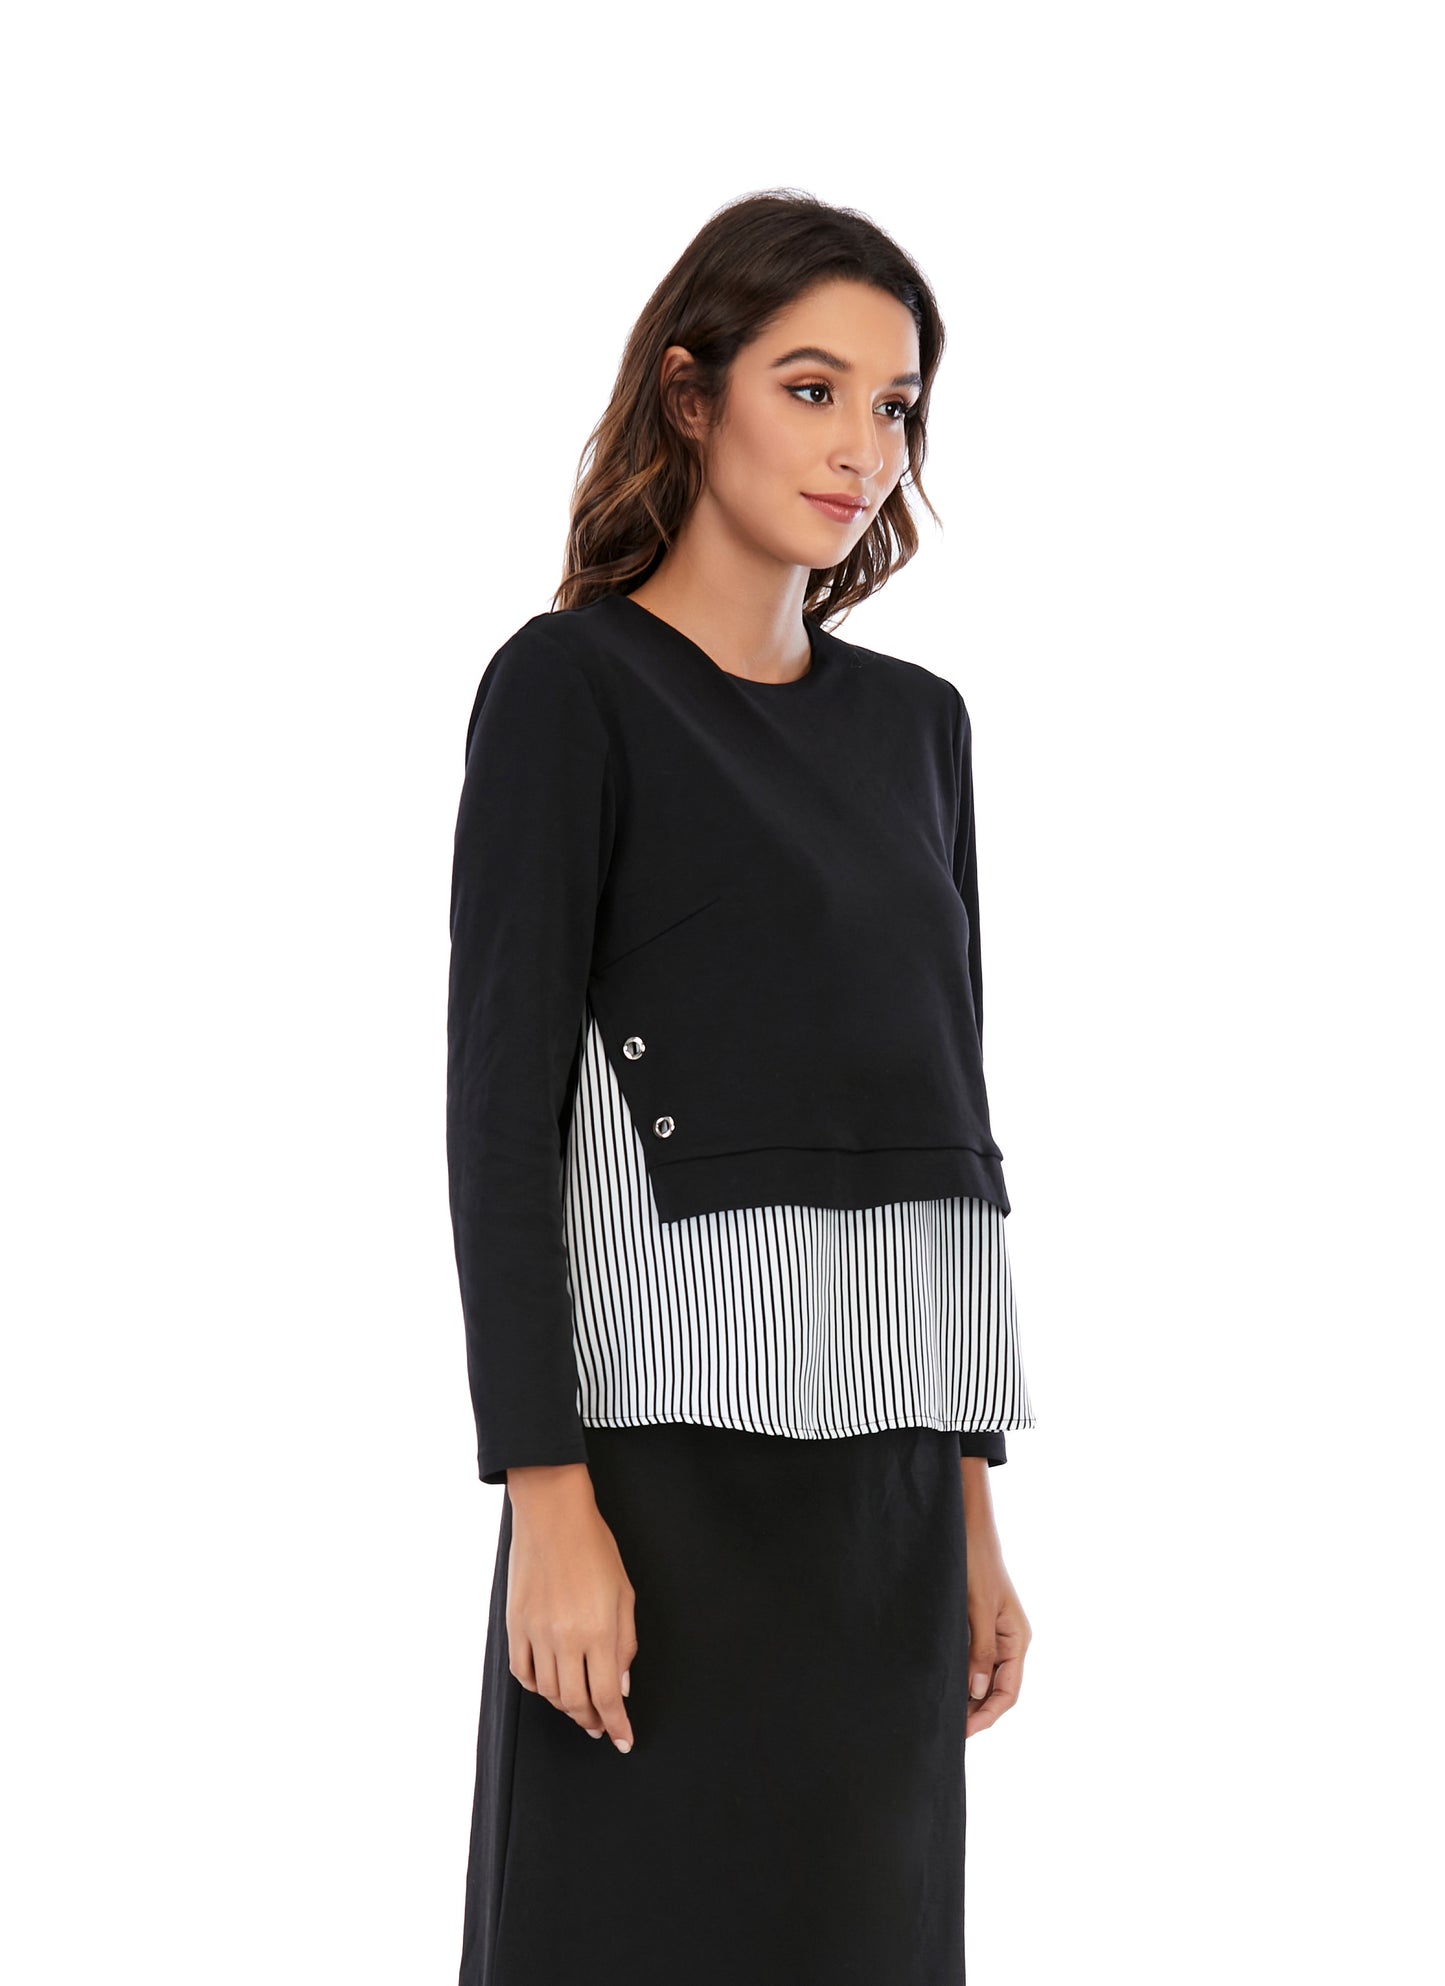 Solid and Striped Long Sleeve Monochrome - alamaud